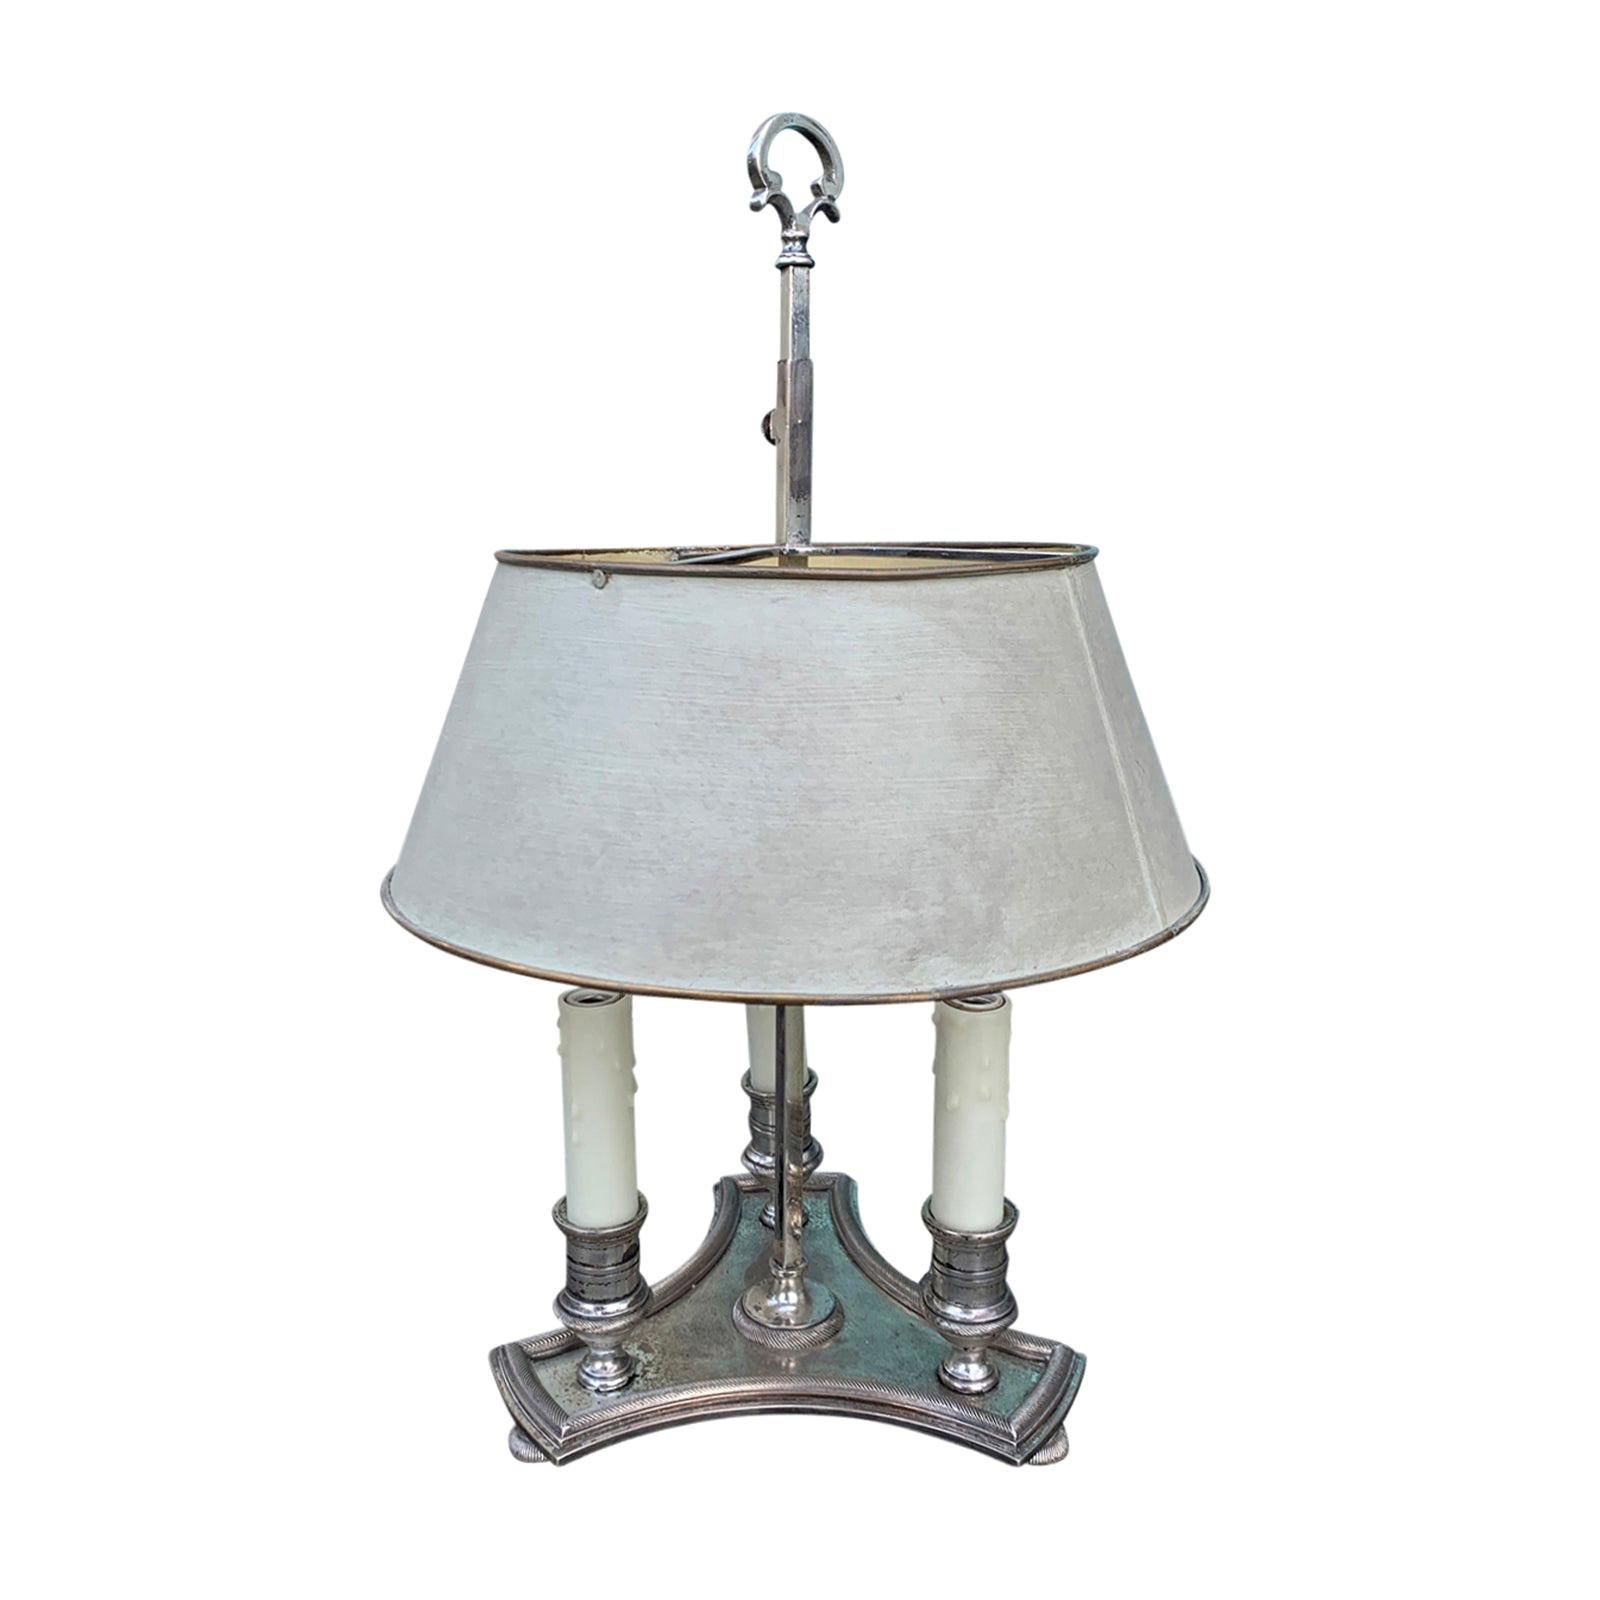 Early 20th Century French Bouillotte Lamp with Custom Painted Shade, Stamped